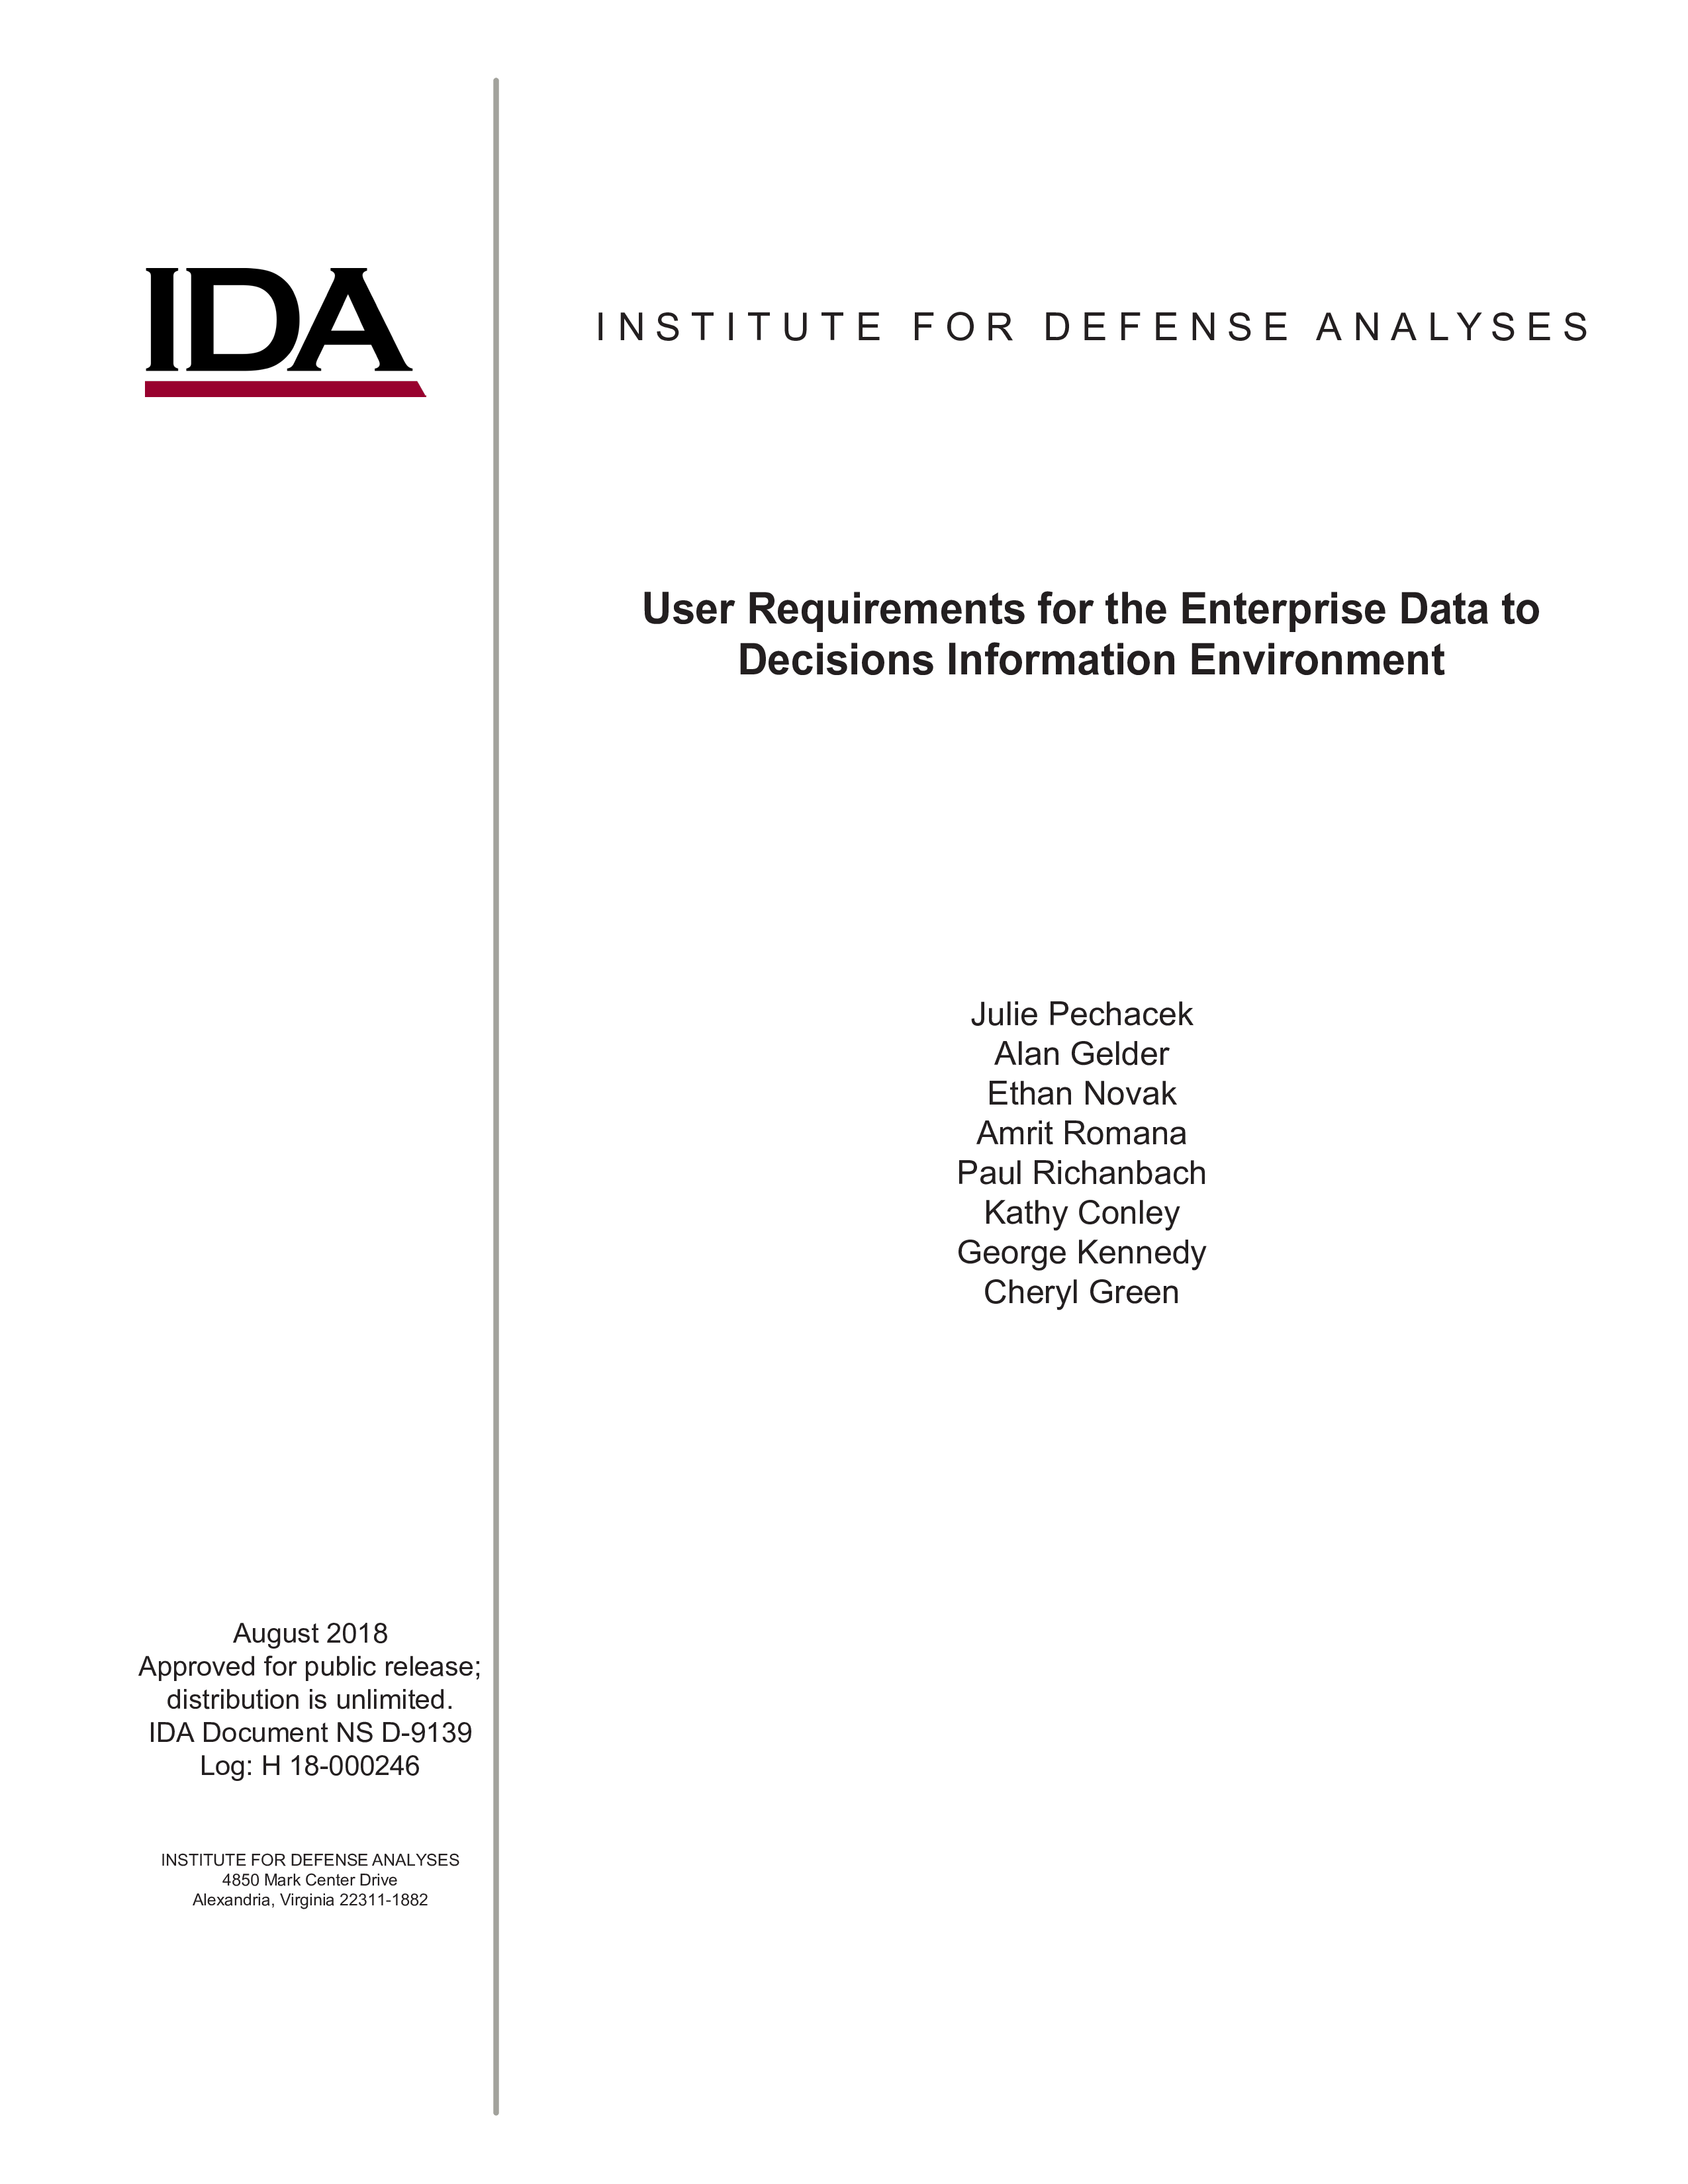 User Requirements for the Enterprise Data to Decisions Information Environment